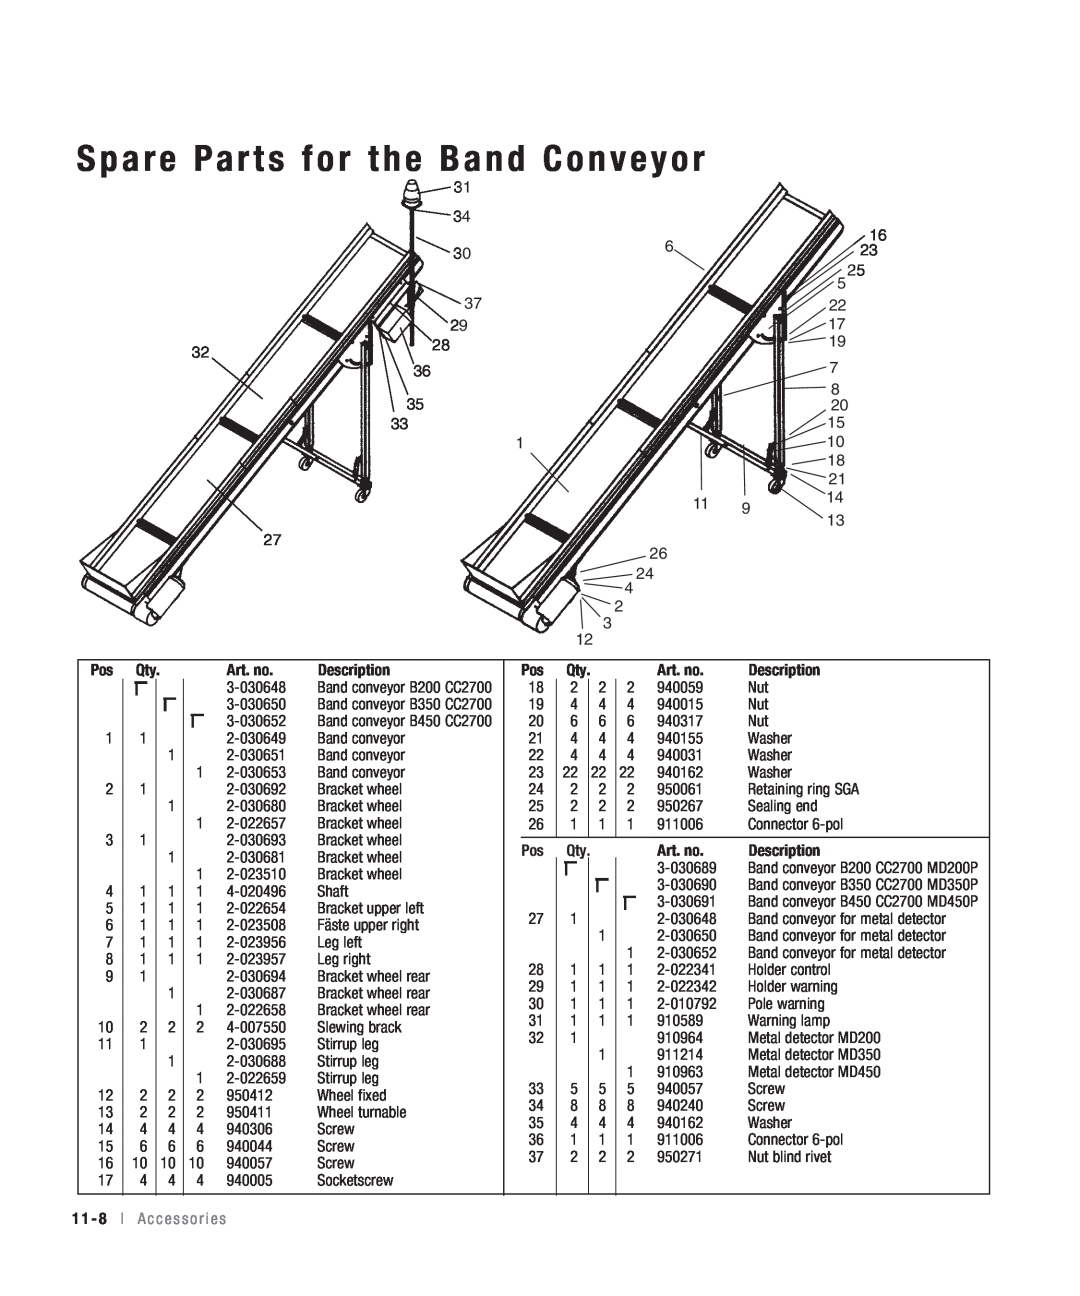 Conair CHS-810 manual Spare Parts for the Band Conveyor, Art. no, Description, 11 - 8 l A c c e s s o r i e s 